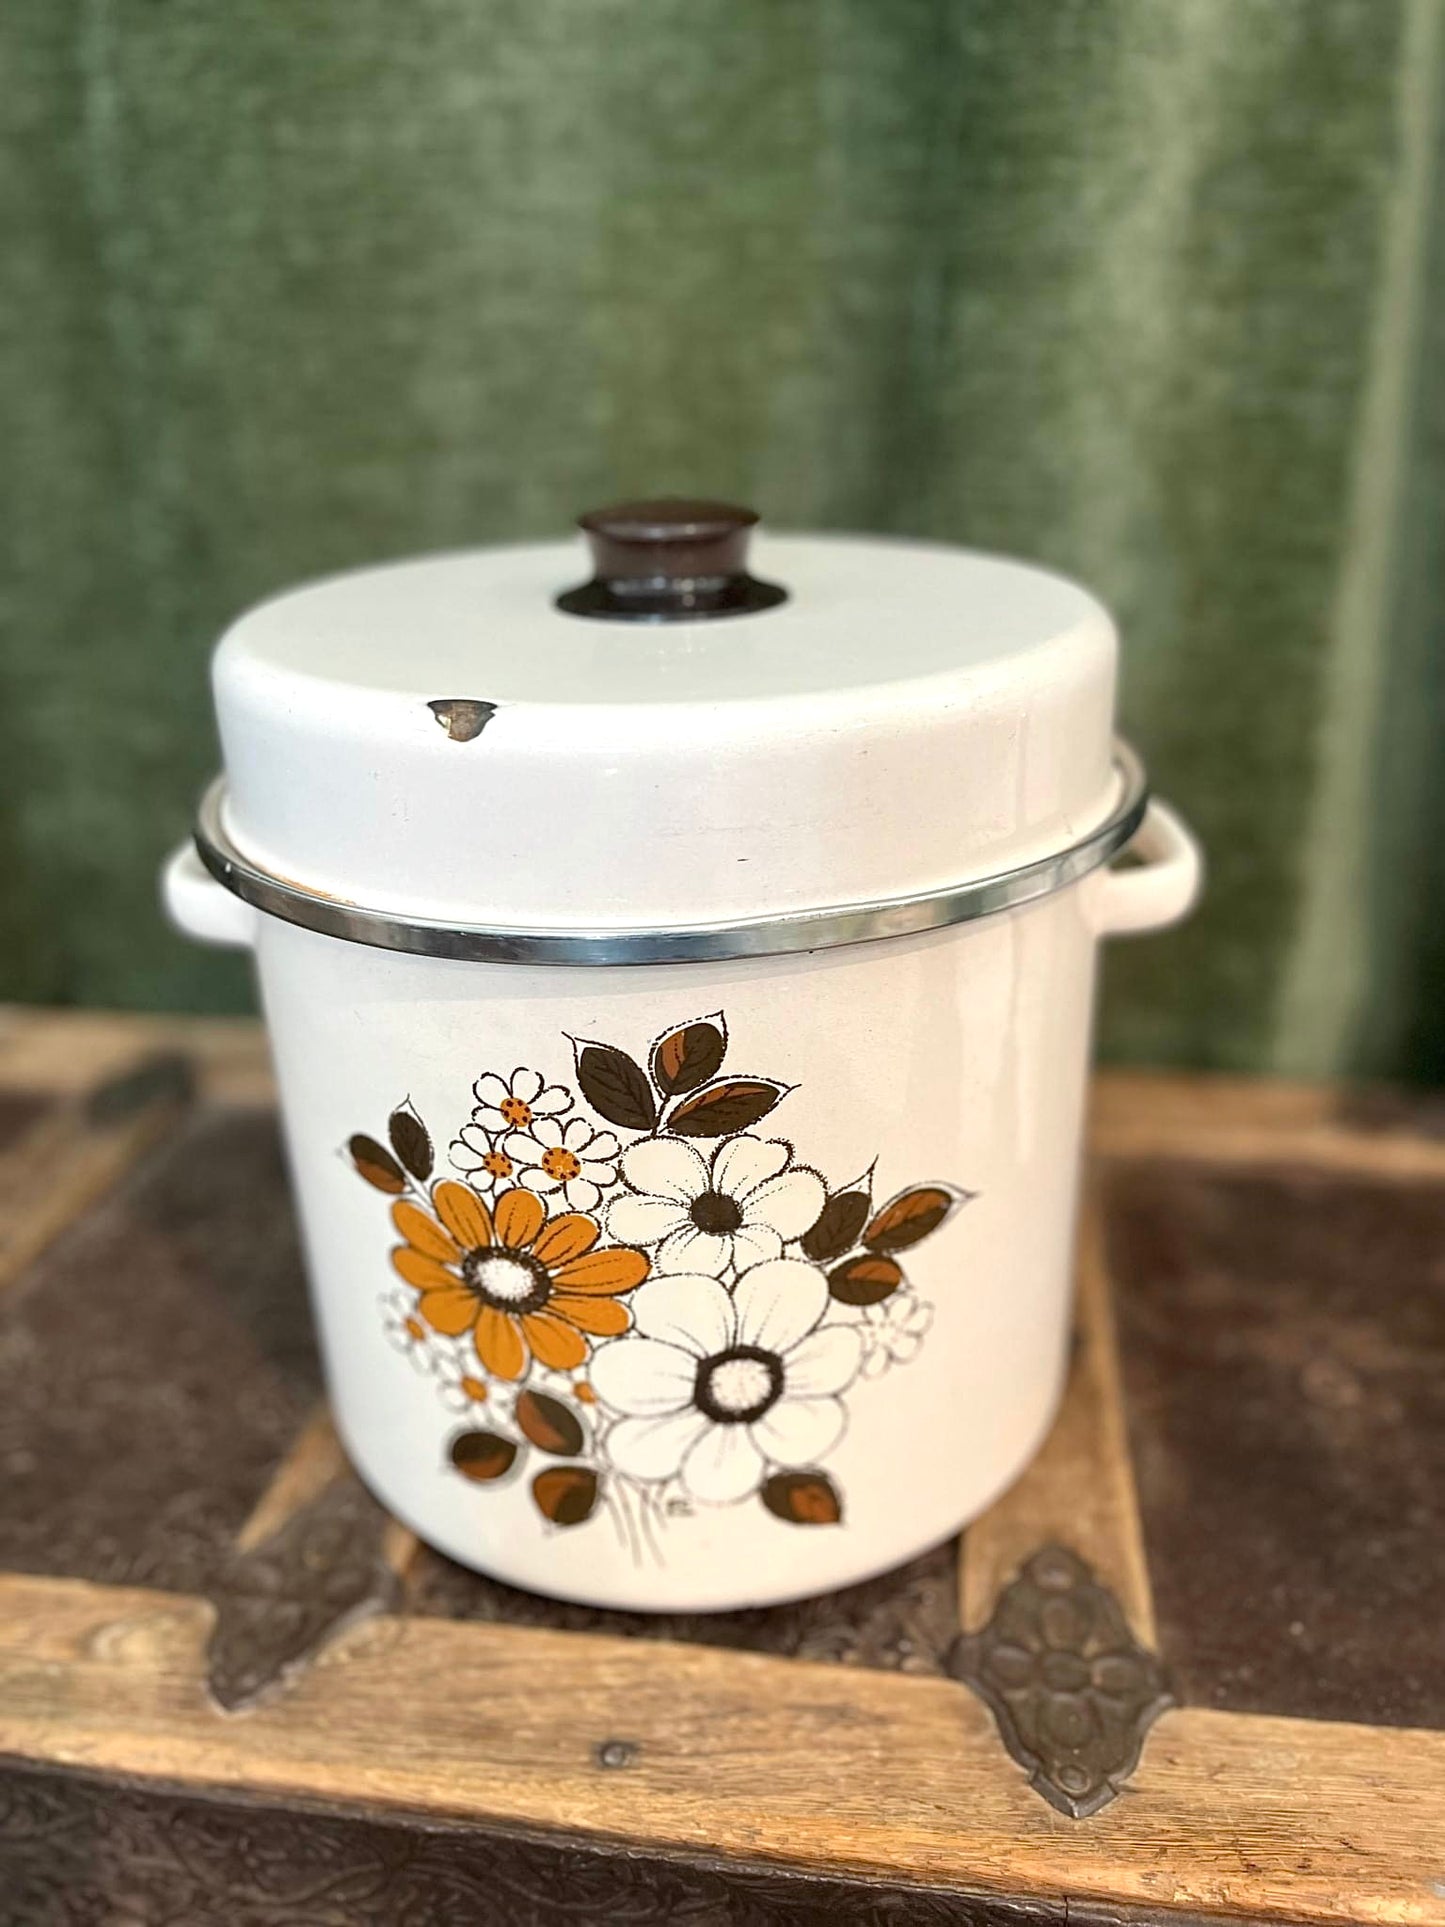 Floral Enamelware Pot with Lid